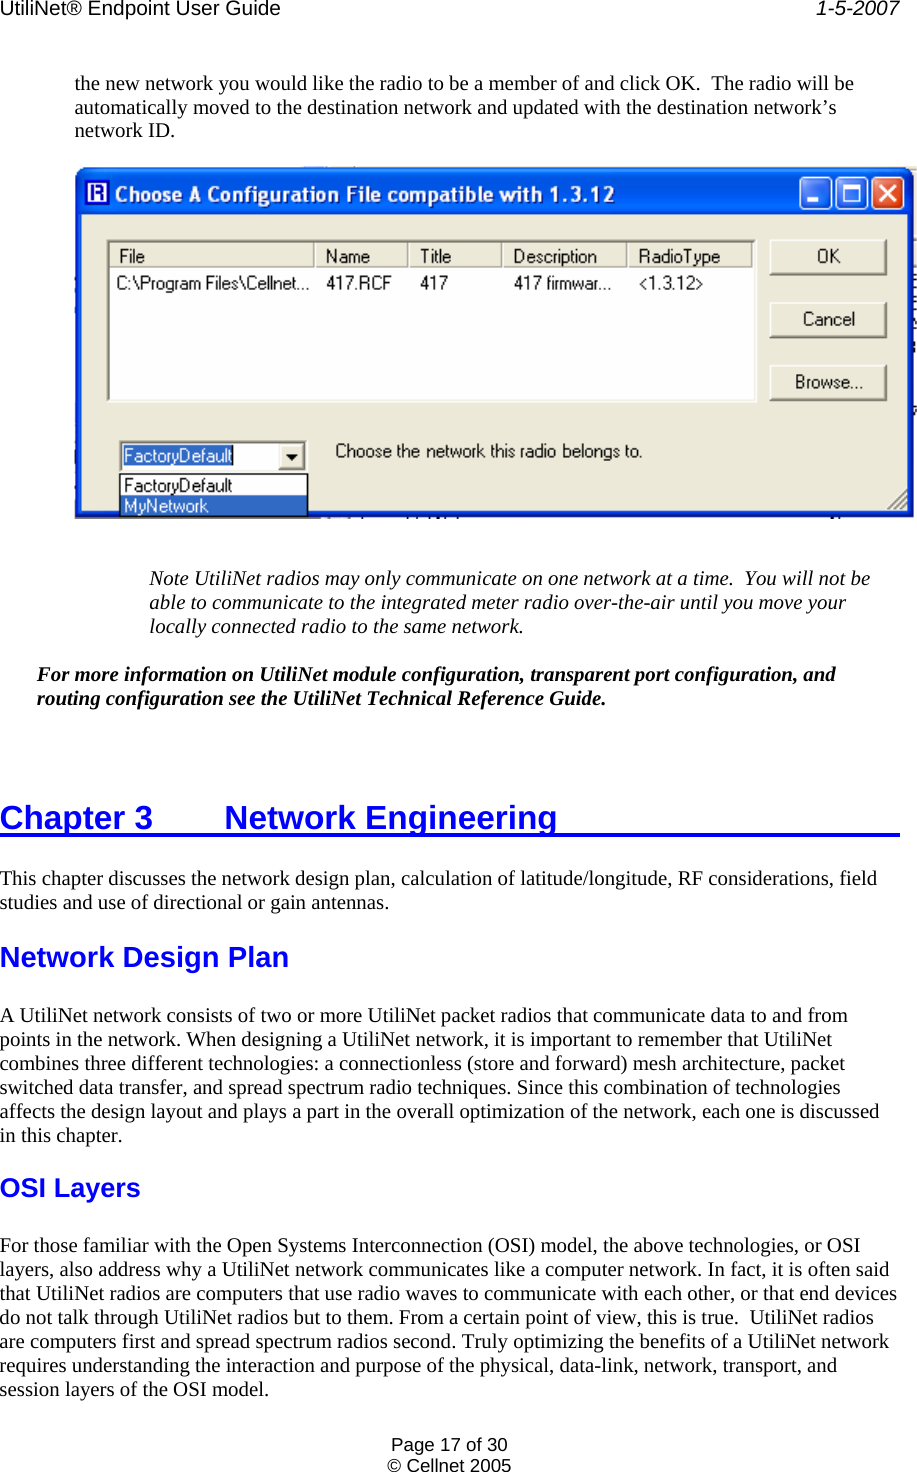 UtiliNet® Endpoint User Guide    1-5-2007 Page 17 of 30 © Cellnet 2005  the new network you would like the radio to be a member of and click OK.  The radio will be automatically moved to the destination network and updated with the destination network’s network ID.    Note UtiliNet radios may only communicate on one network at a time.  You will not be able to communicate to the integrated meter radio over-the-air until you move your locally connected radio to the same network.   For more information on UtiliNet module configuration, transparent port configuration, and routing configuration see the UtiliNet Technical Reference Guide.  Chapter 3   Network Engineering            This chapter discusses the network design plan, calculation of latitude/longitude, RF considerations, field studies and use of directional or gain antennas. Network Design Plan  A UtiliNet network consists of two or more UtiliNet packet radios that communicate data to and from points in the network. When designing a UtiliNet network, it is important to remember that UtiliNet combines three different technologies: a connectionless (store and forward) mesh architecture, packet switched data transfer, and spread spectrum radio techniques. Since this combination of technologies affects the design layout and plays a part in the overall optimization of the network, each one is discussed in this chapter. OSI Layers  For those familiar with the Open Systems Interconnection (OSI) model, the above technologies, or OSI layers, also address why a UtiliNet network communicates like a computer network. In fact, it is often said that UtiliNet radios are computers that use radio waves to communicate with each other, or that end devices do not talk through UtiliNet radios but to them. From a certain point of view, this is true.  UtiliNet radios are computers first and spread spectrum radios second. Truly optimizing the benefits of a UtiliNet network requires understanding the interaction and purpose of the physical, data-link, network, transport, and session layers of the OSI model. 